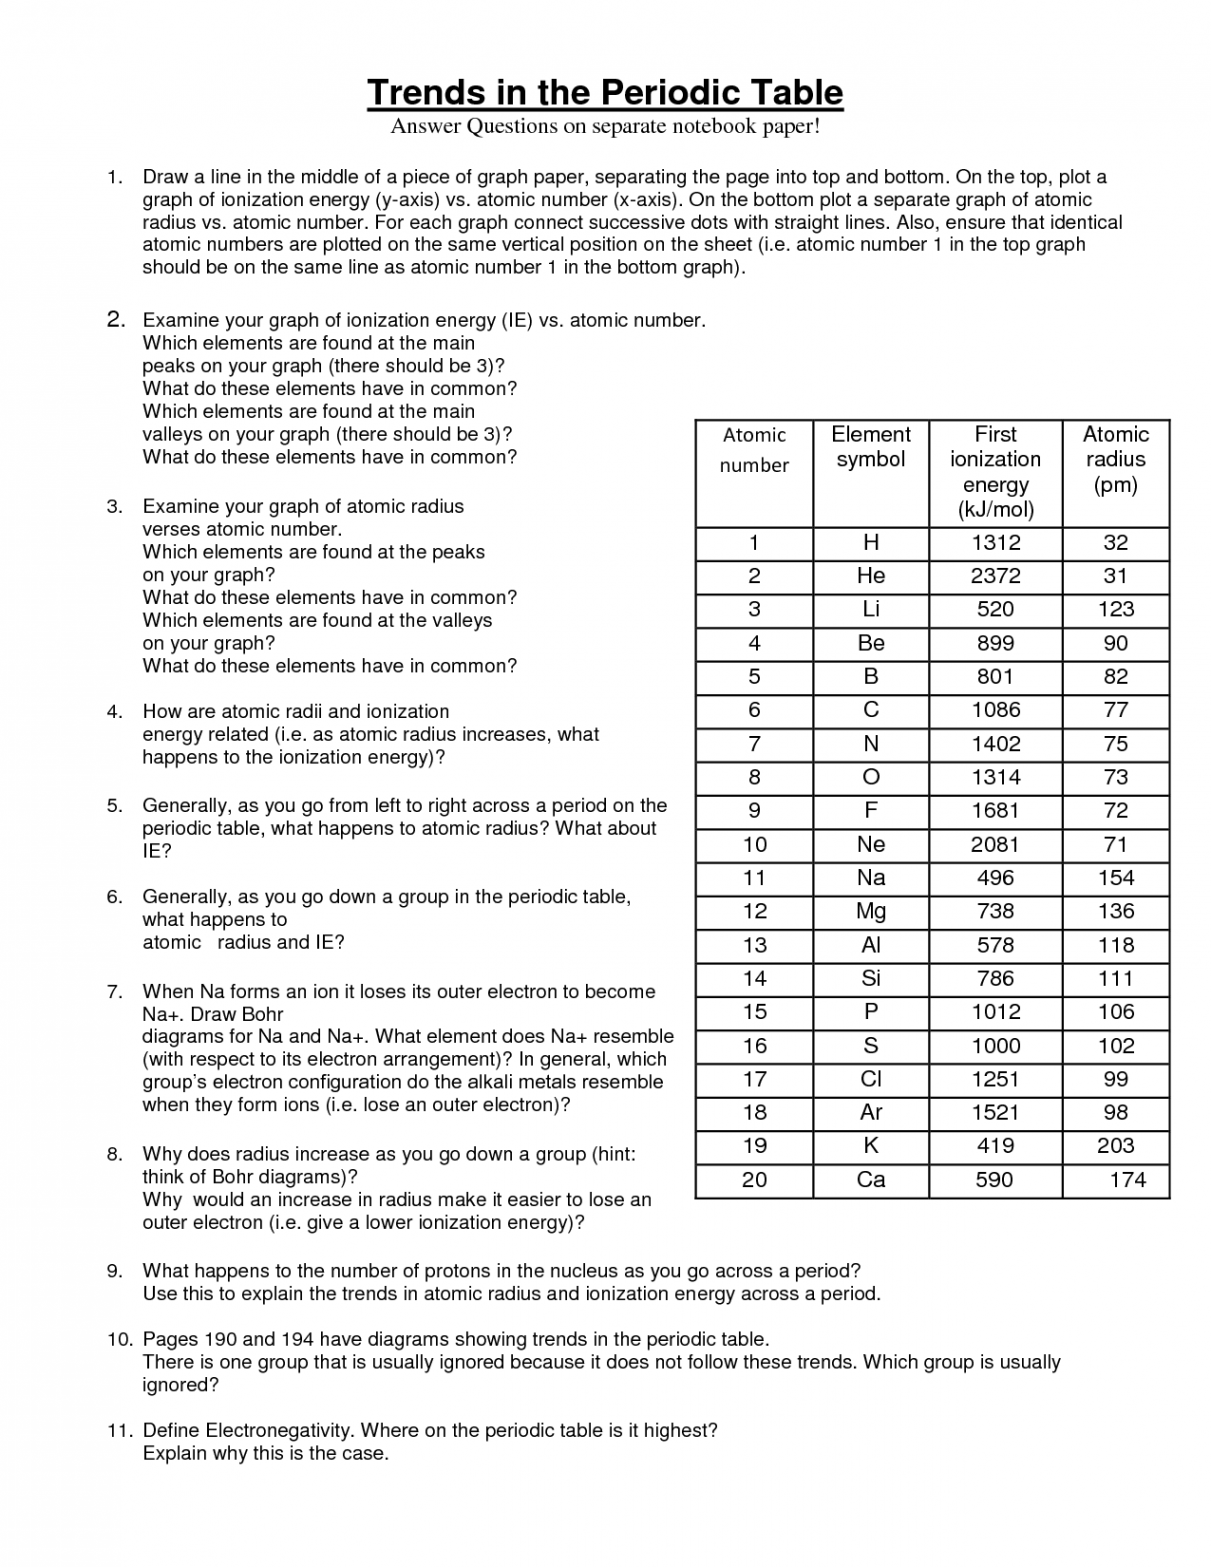 Periodic Table Trends Worksheet Answer Key  Periodic table